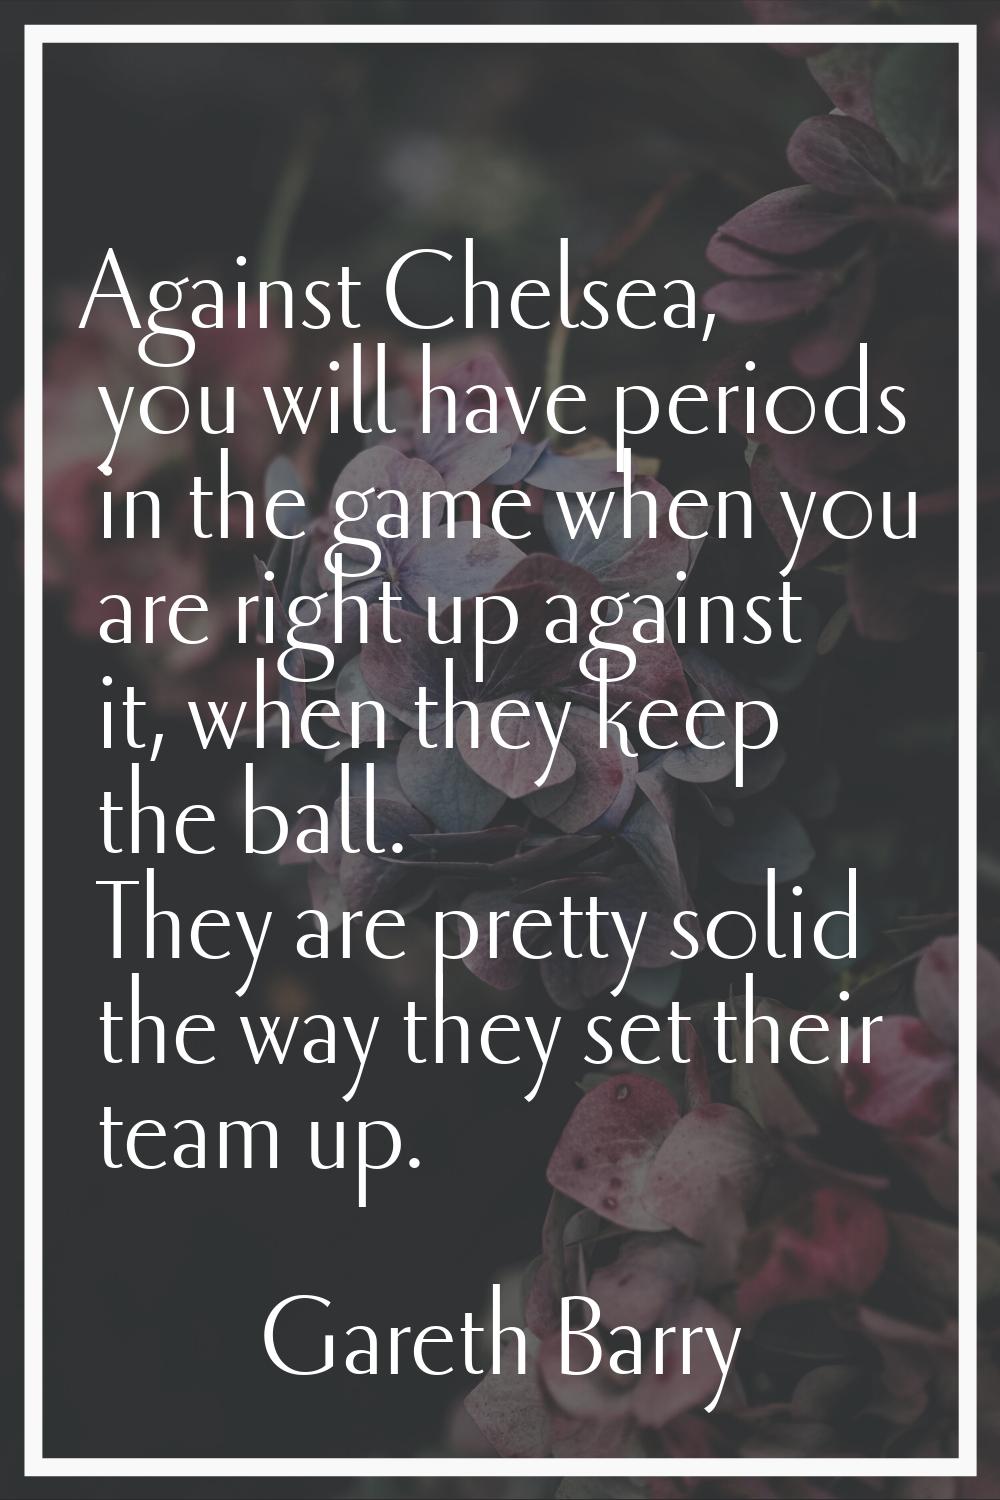 Against Chelsea, you will have periods in the game when you are right up against it, when they keep